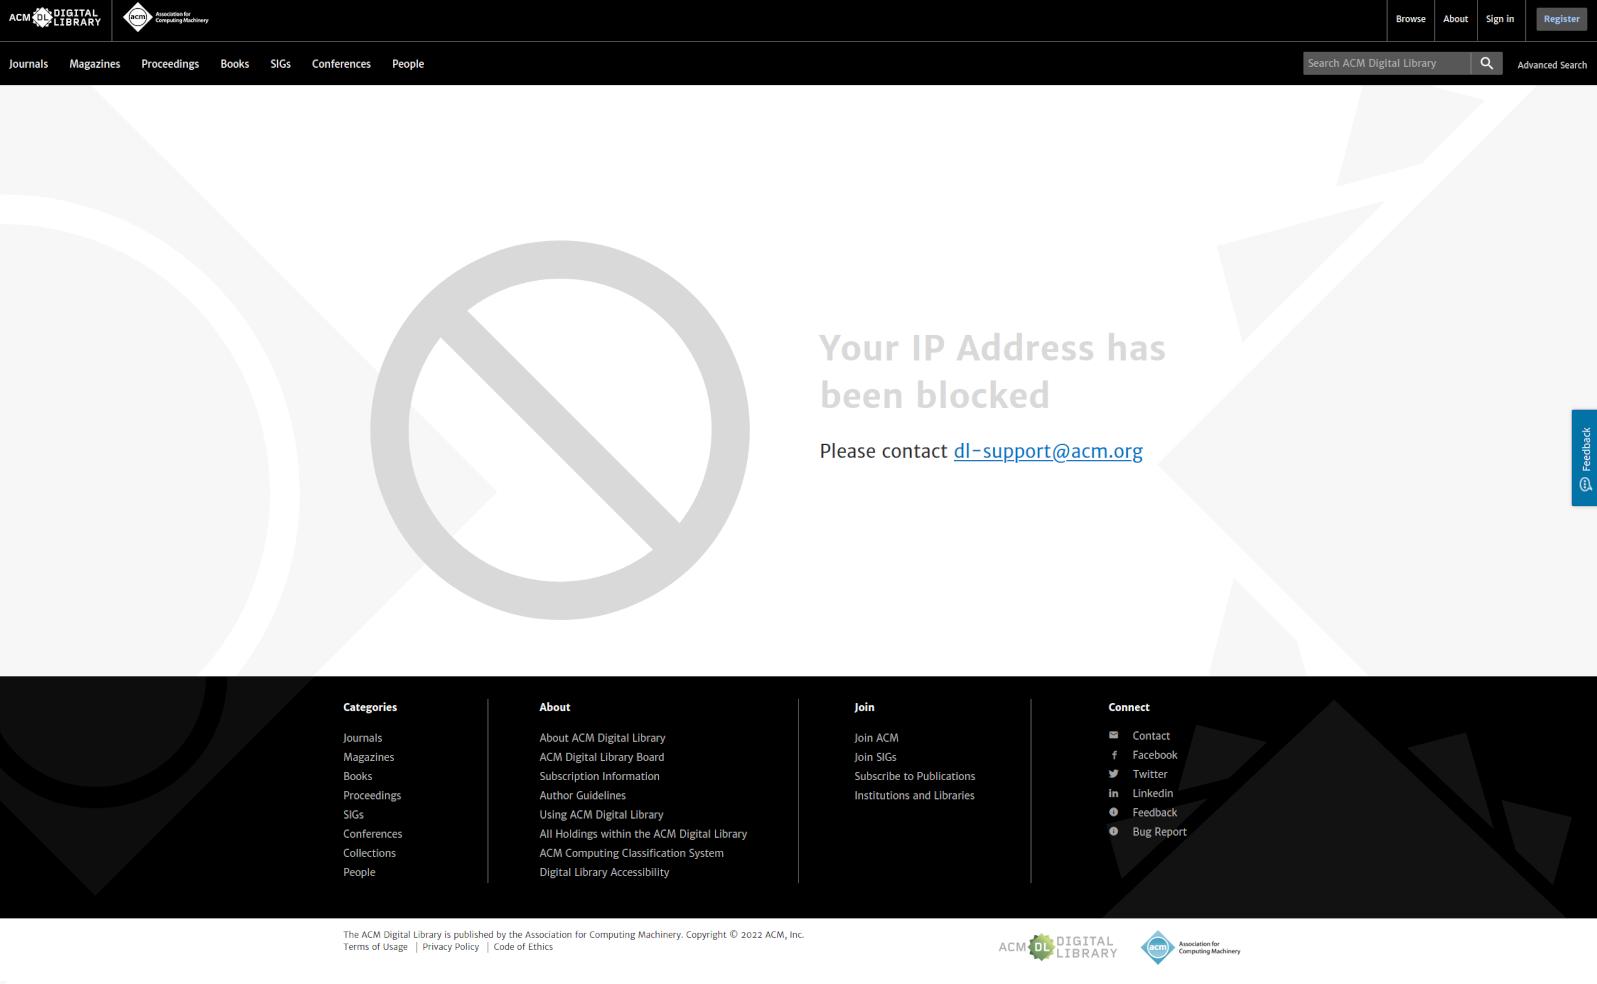 screenshot of the ACM website showing that my IP address is blocked with a support email listed for help